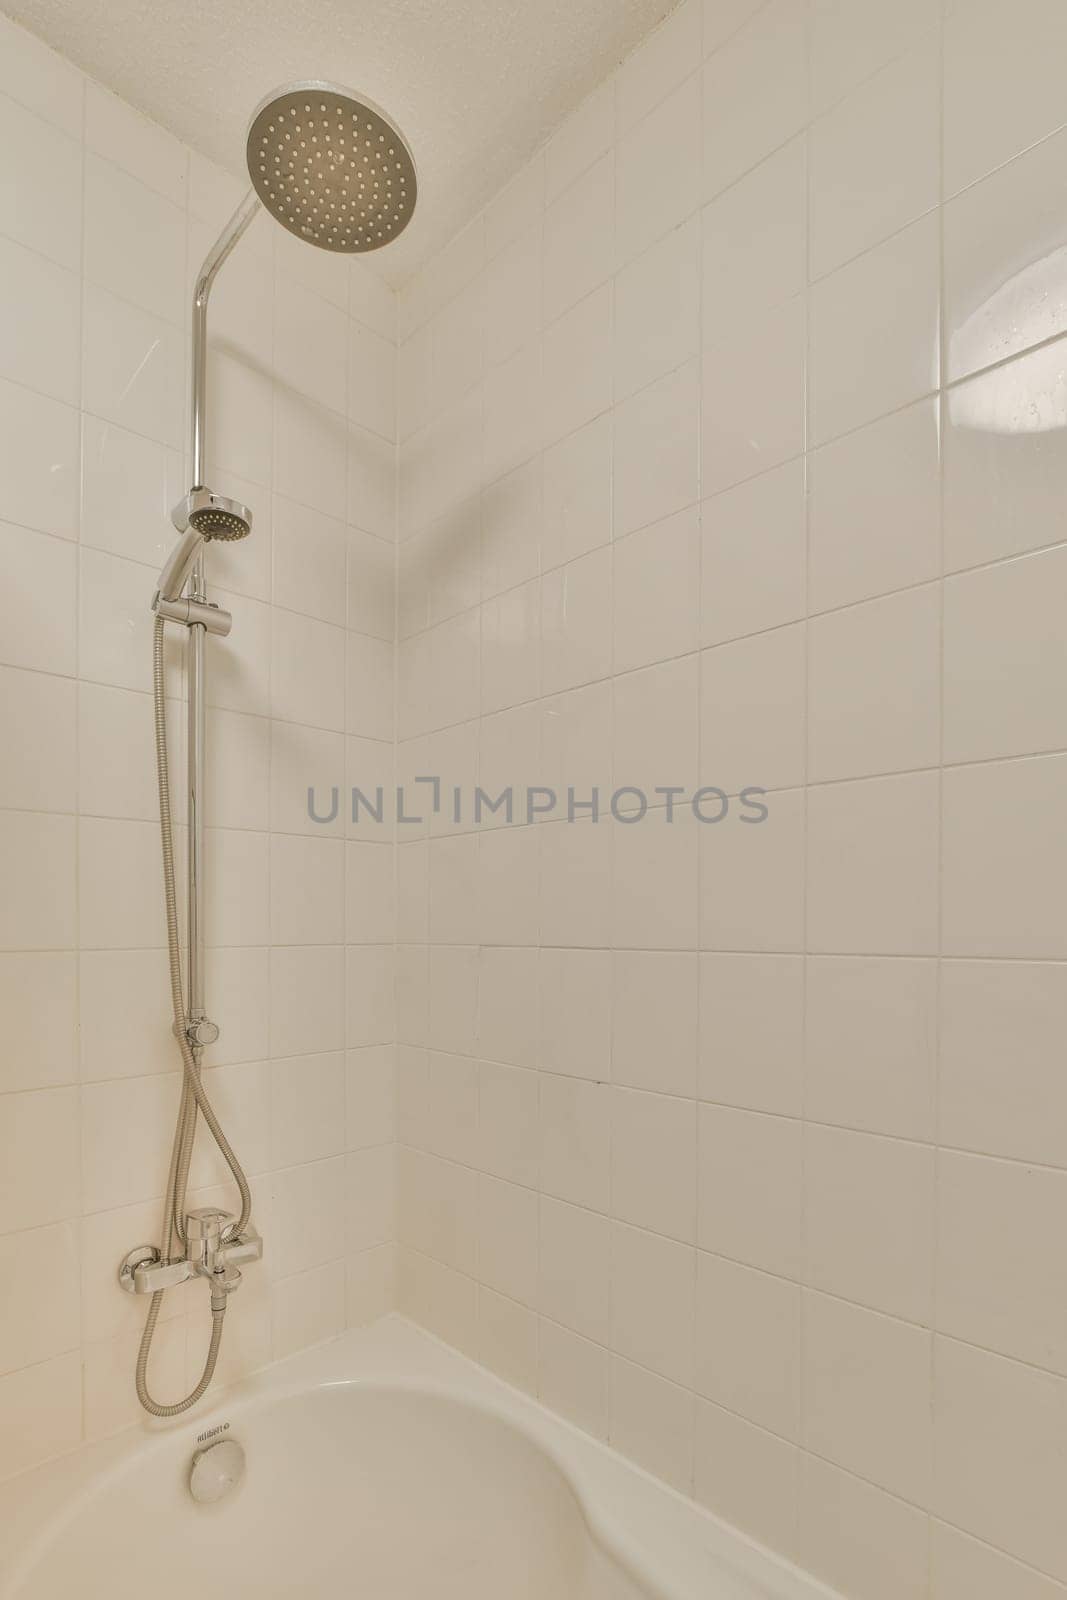 a bathtub with the shower head in it's position and hands on the edge of the tubpipe